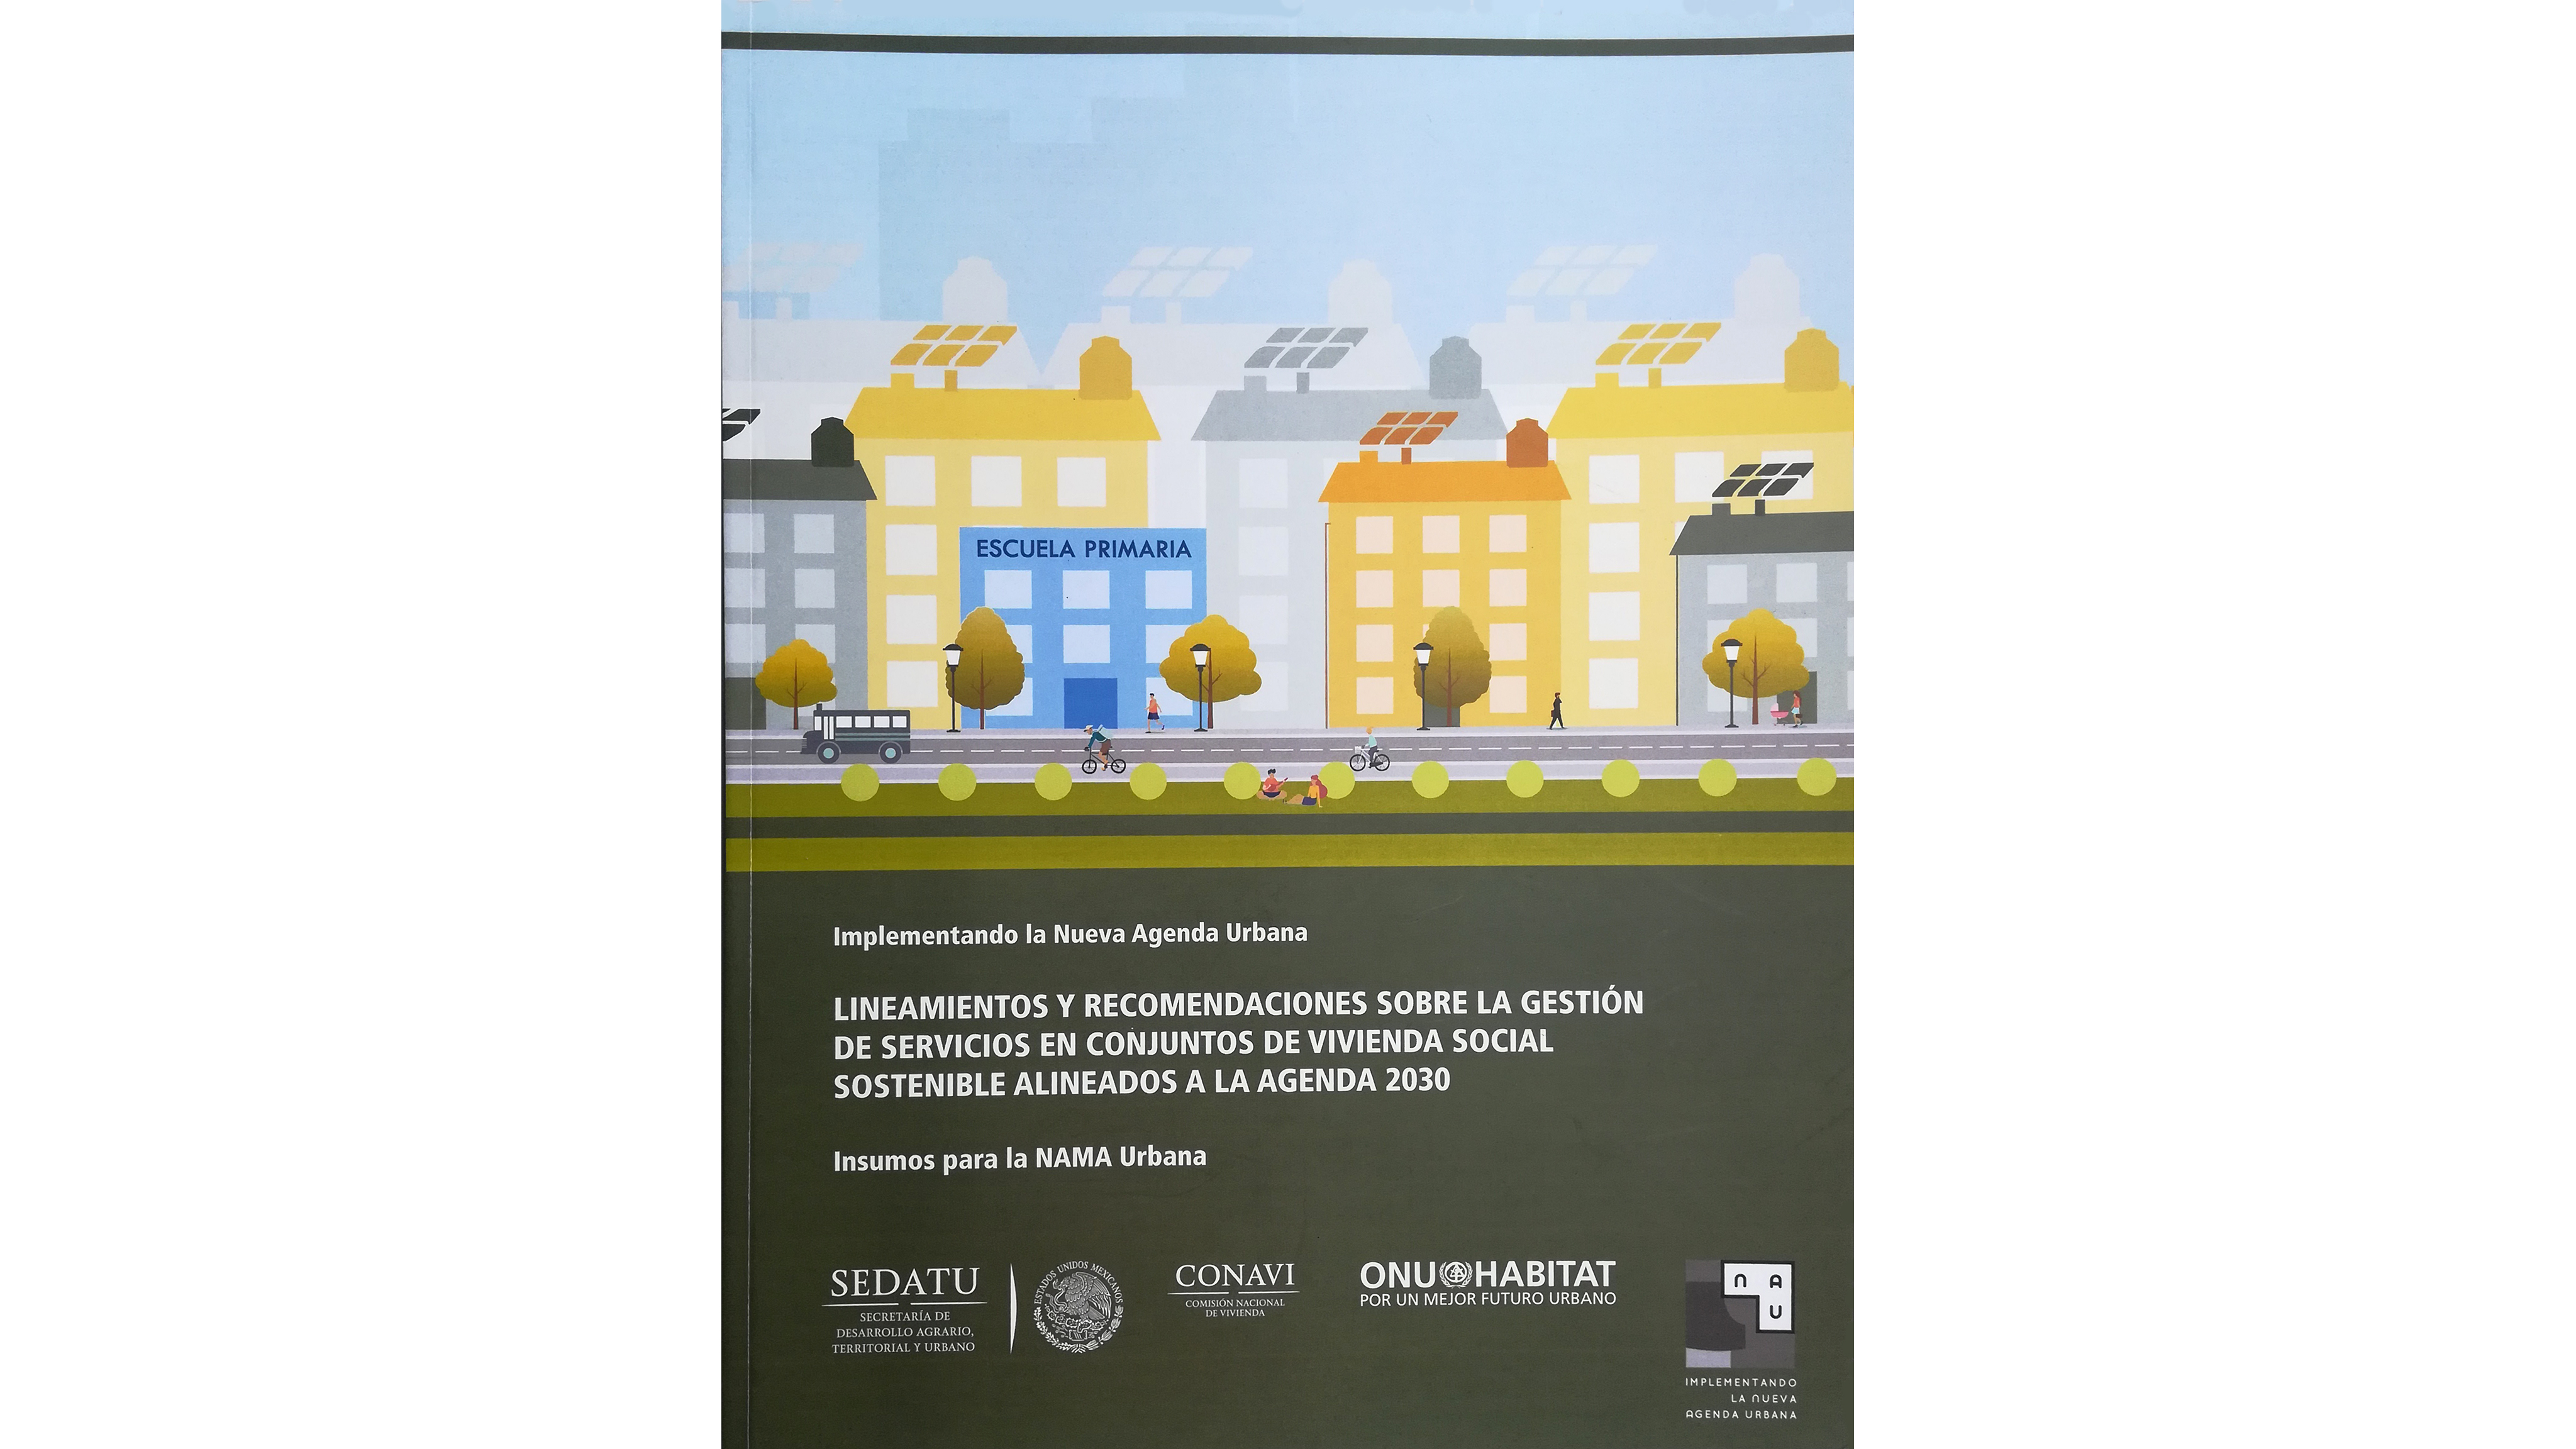 CONAVI Guidelines and recommendations on service management in sustainable social housing developments aligned with the 2030 New Urban Agenda